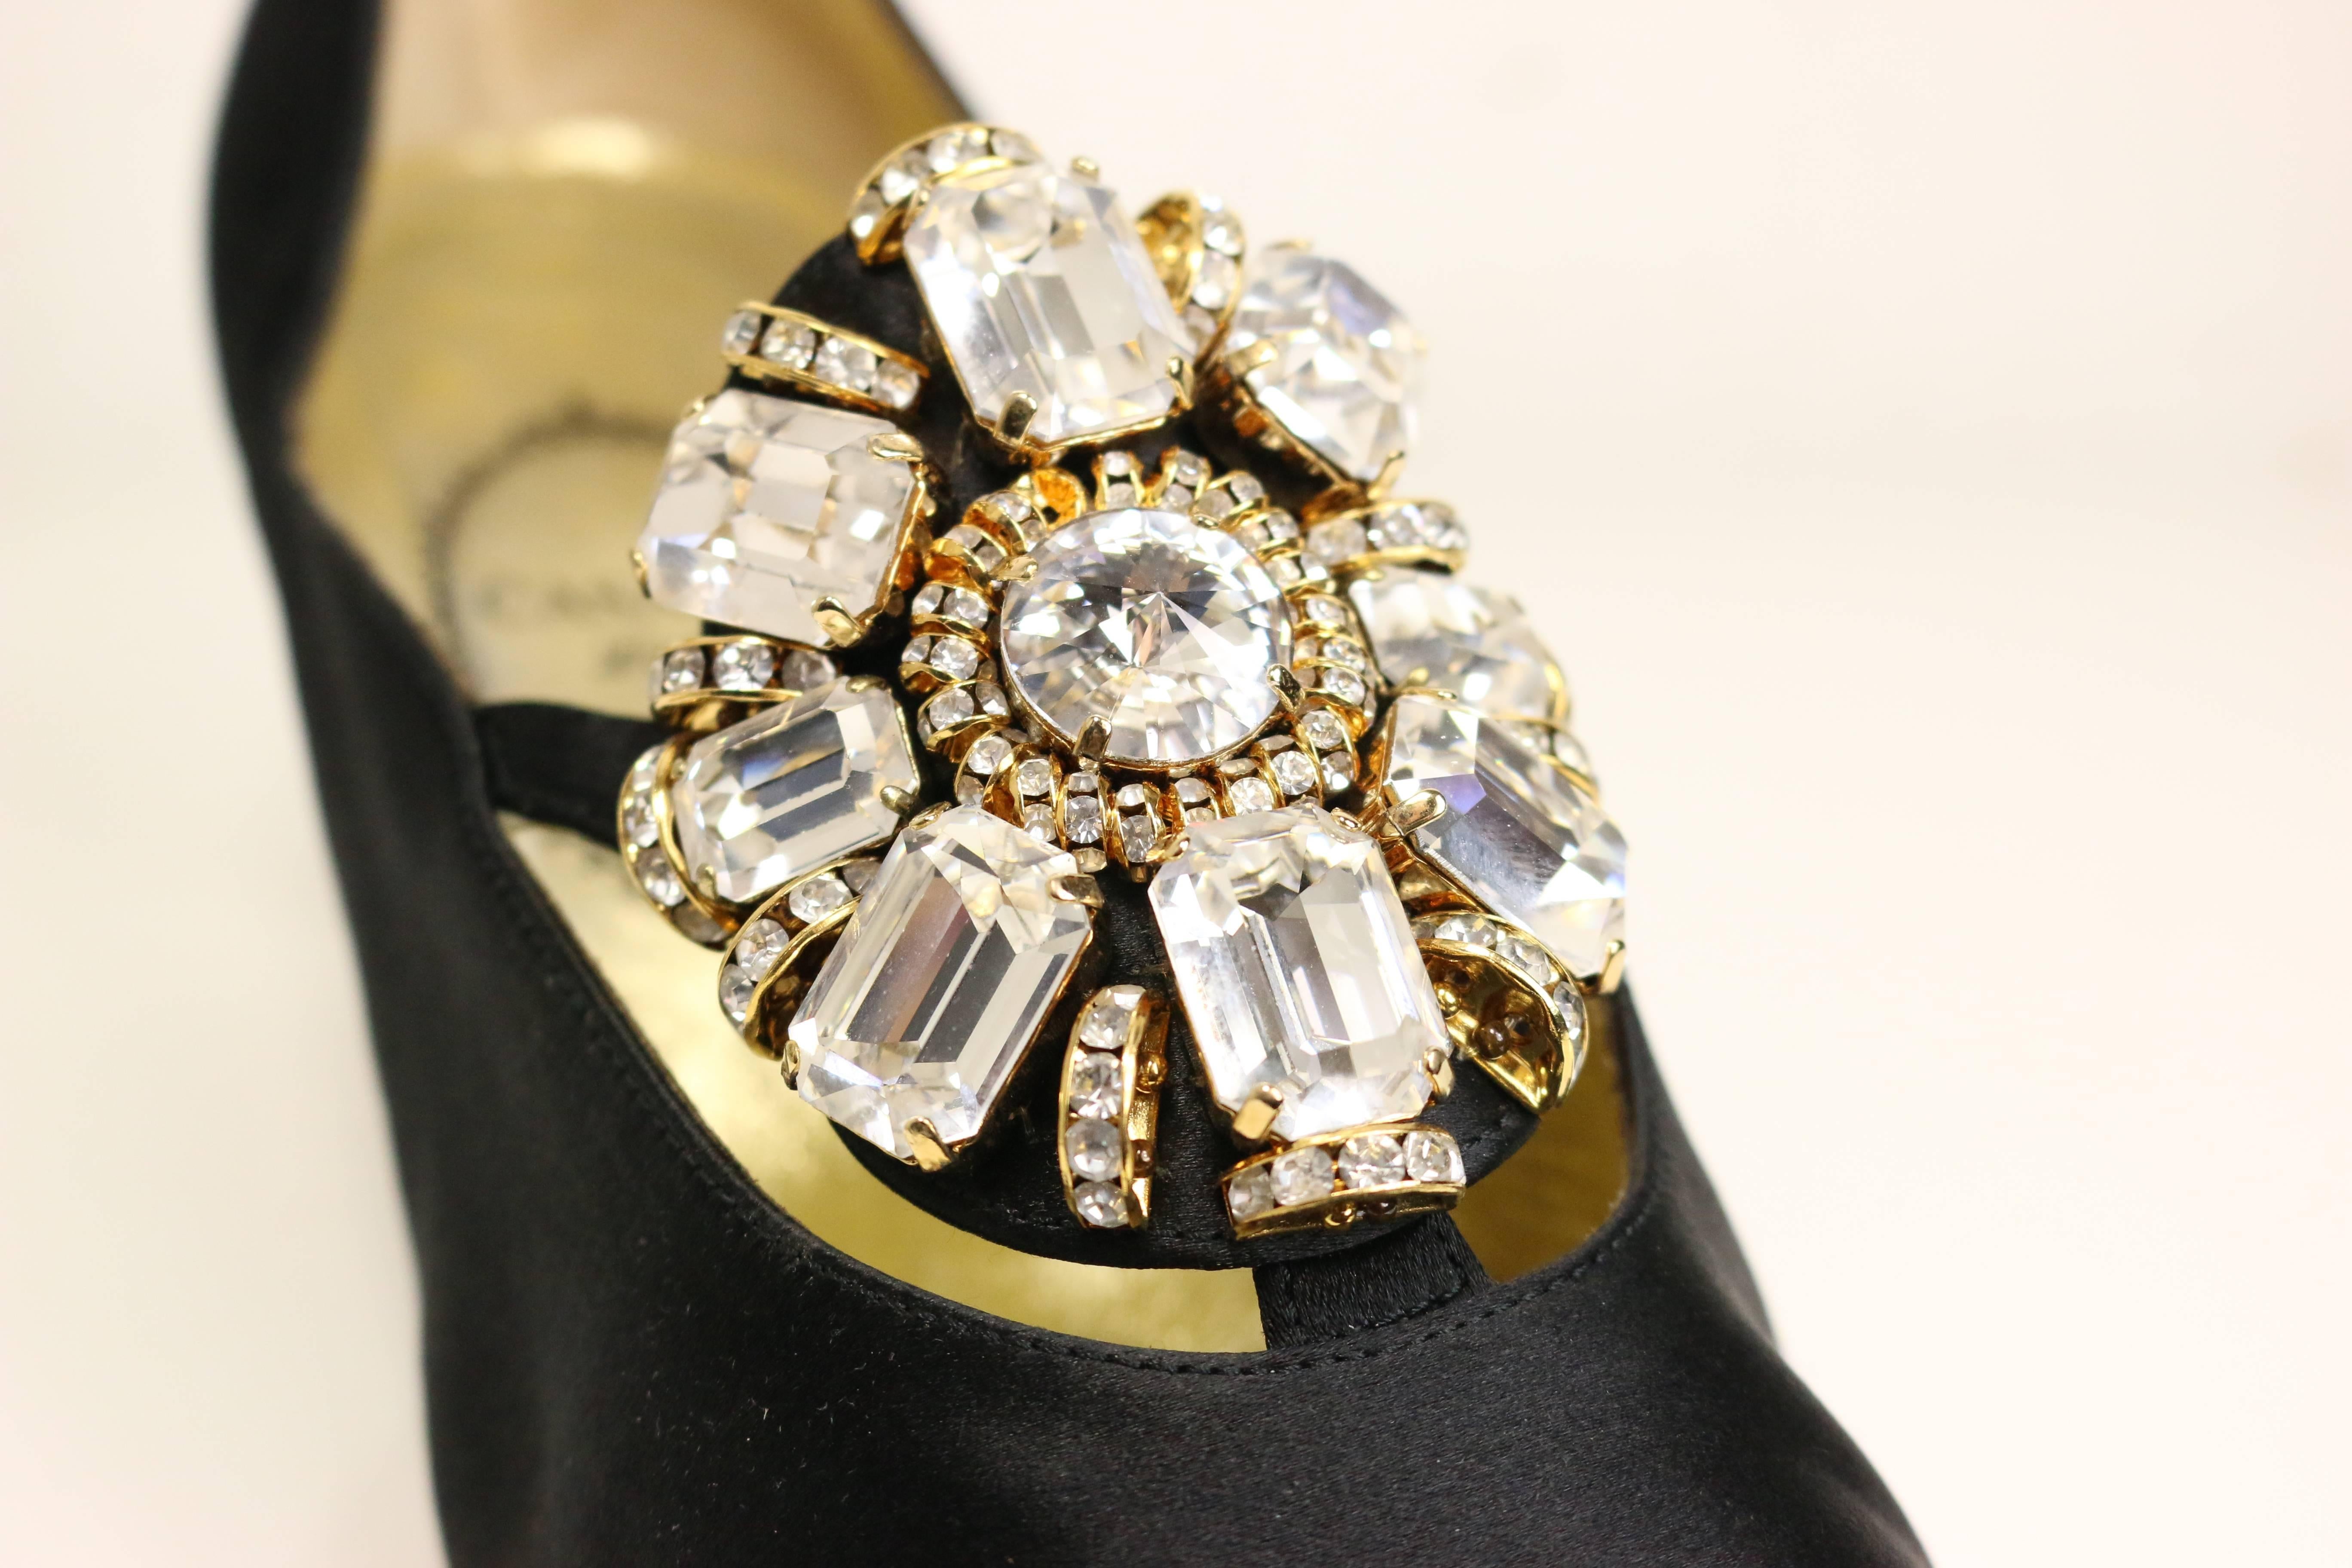 - Vintage 80s Casadei black satin gold toned crystal rhinestones evening shoes. This shoes is featuring in different shapes of rhinestones, those chunky statement rhinestones are bling and shiny! The golden heels of the shoes is another touch of